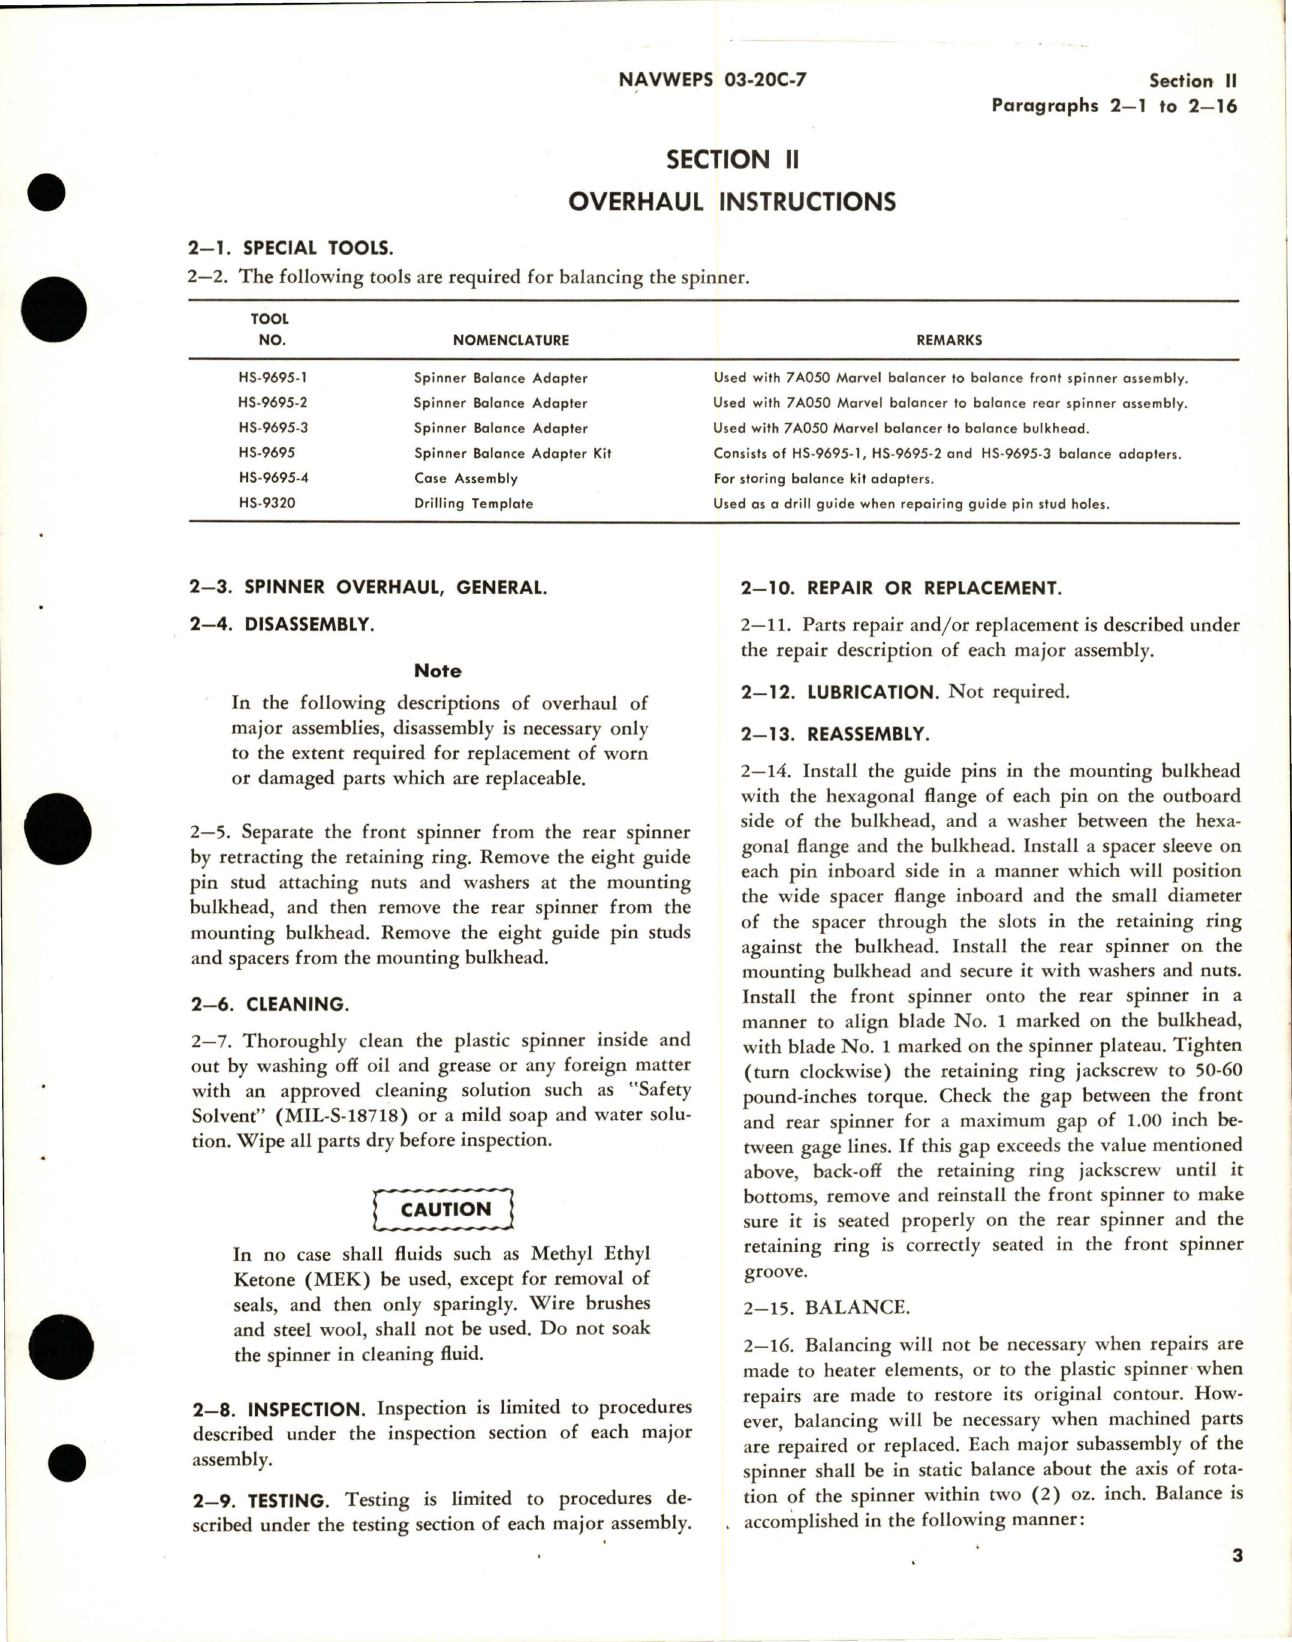 Sample page 7 from AirCorps Library document: Overhaul Instructions for Aircraft Propeller Spinner and Anti-Icing - Spinner Assembly 549427 -  Afterbody Assembly 557635